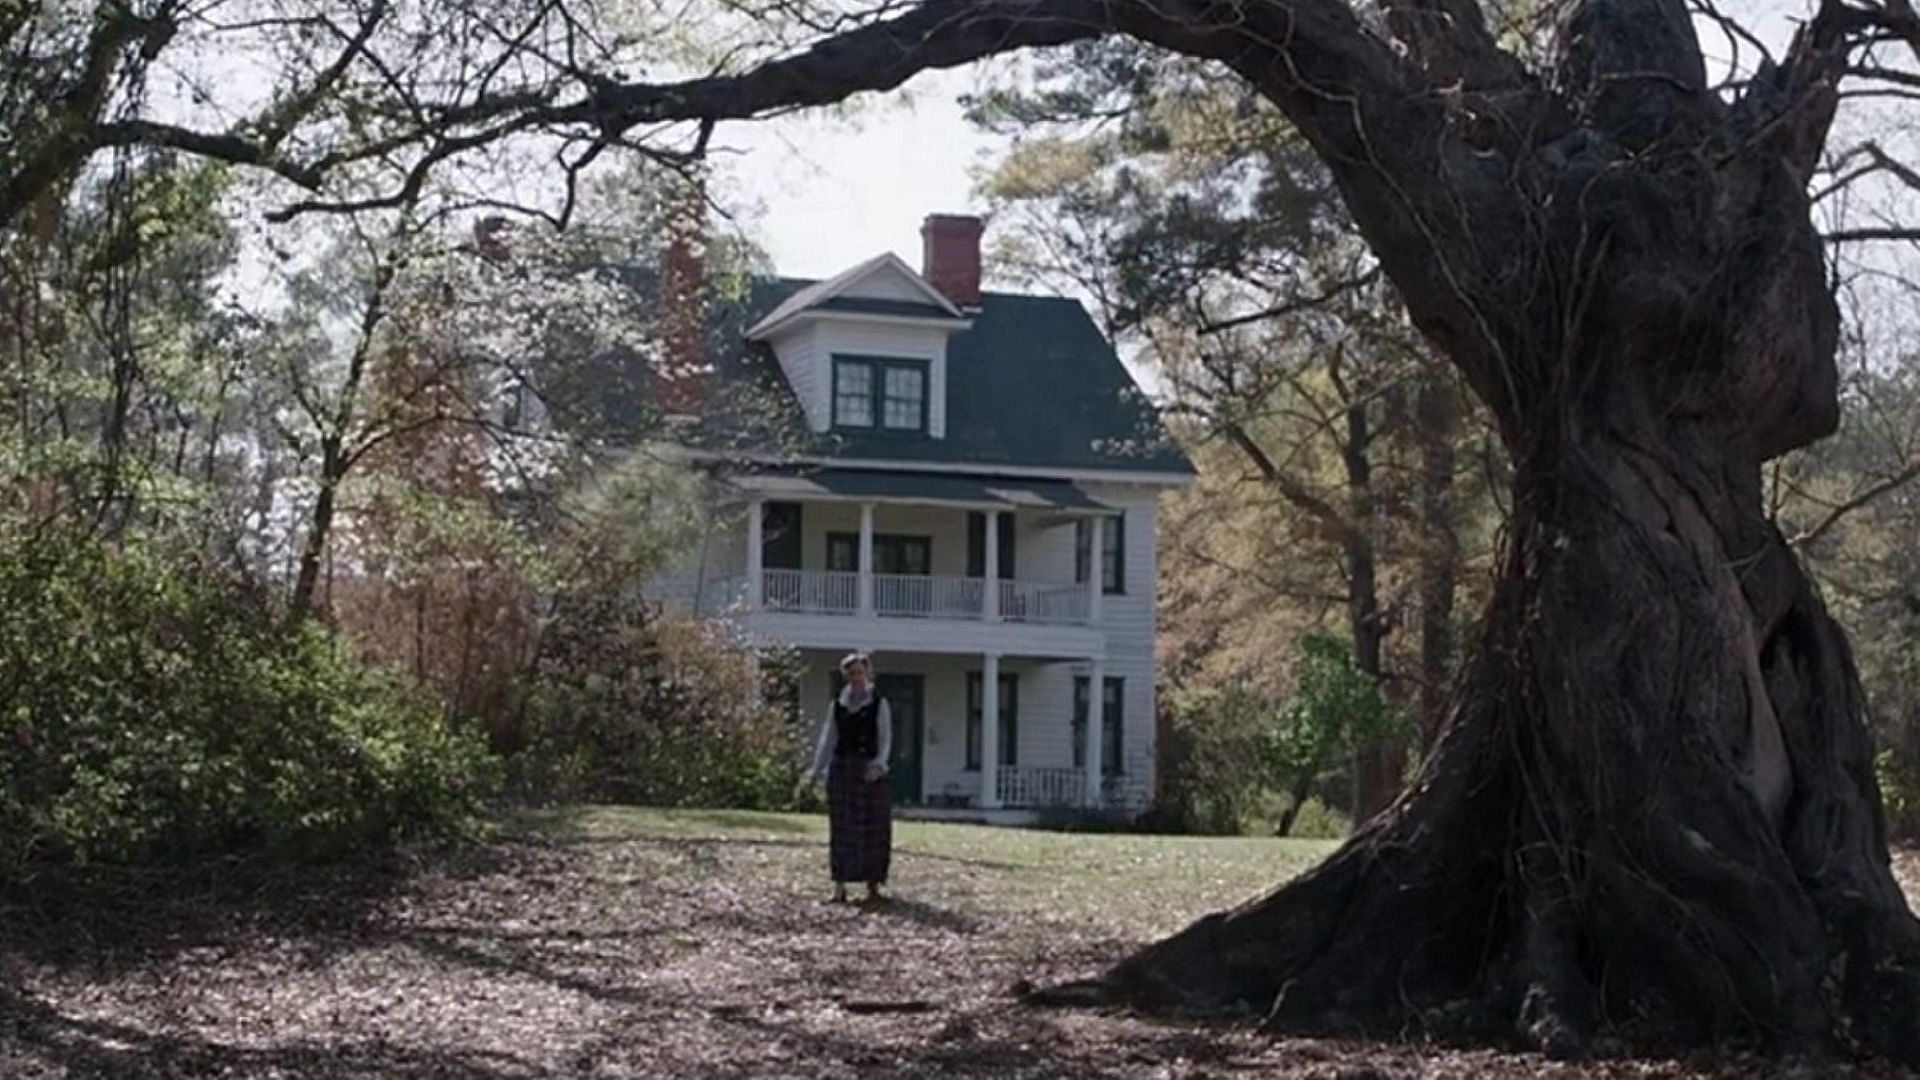 The Conjuring House 5 Quick Facts To Know About The Haunted Rhode Island Home